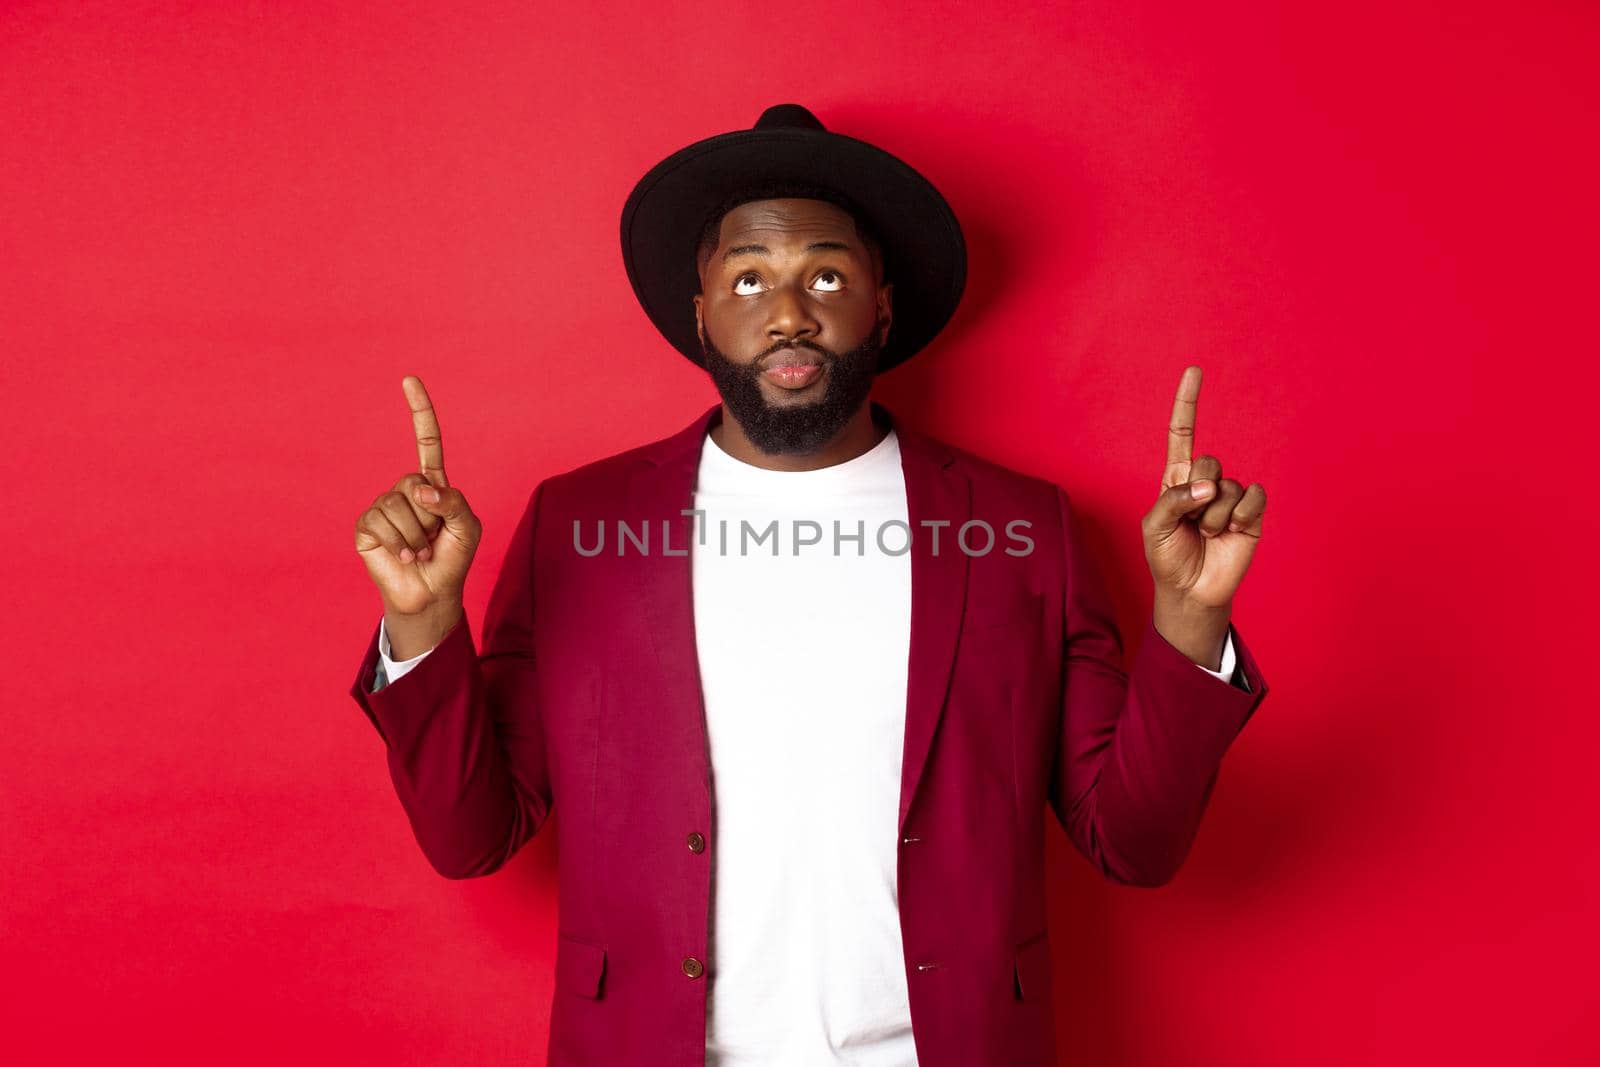 Winter holidays and shopping concept. Curious african american guy in party clothing looking and pointing fingers up, reading promo sign, standing over red background.